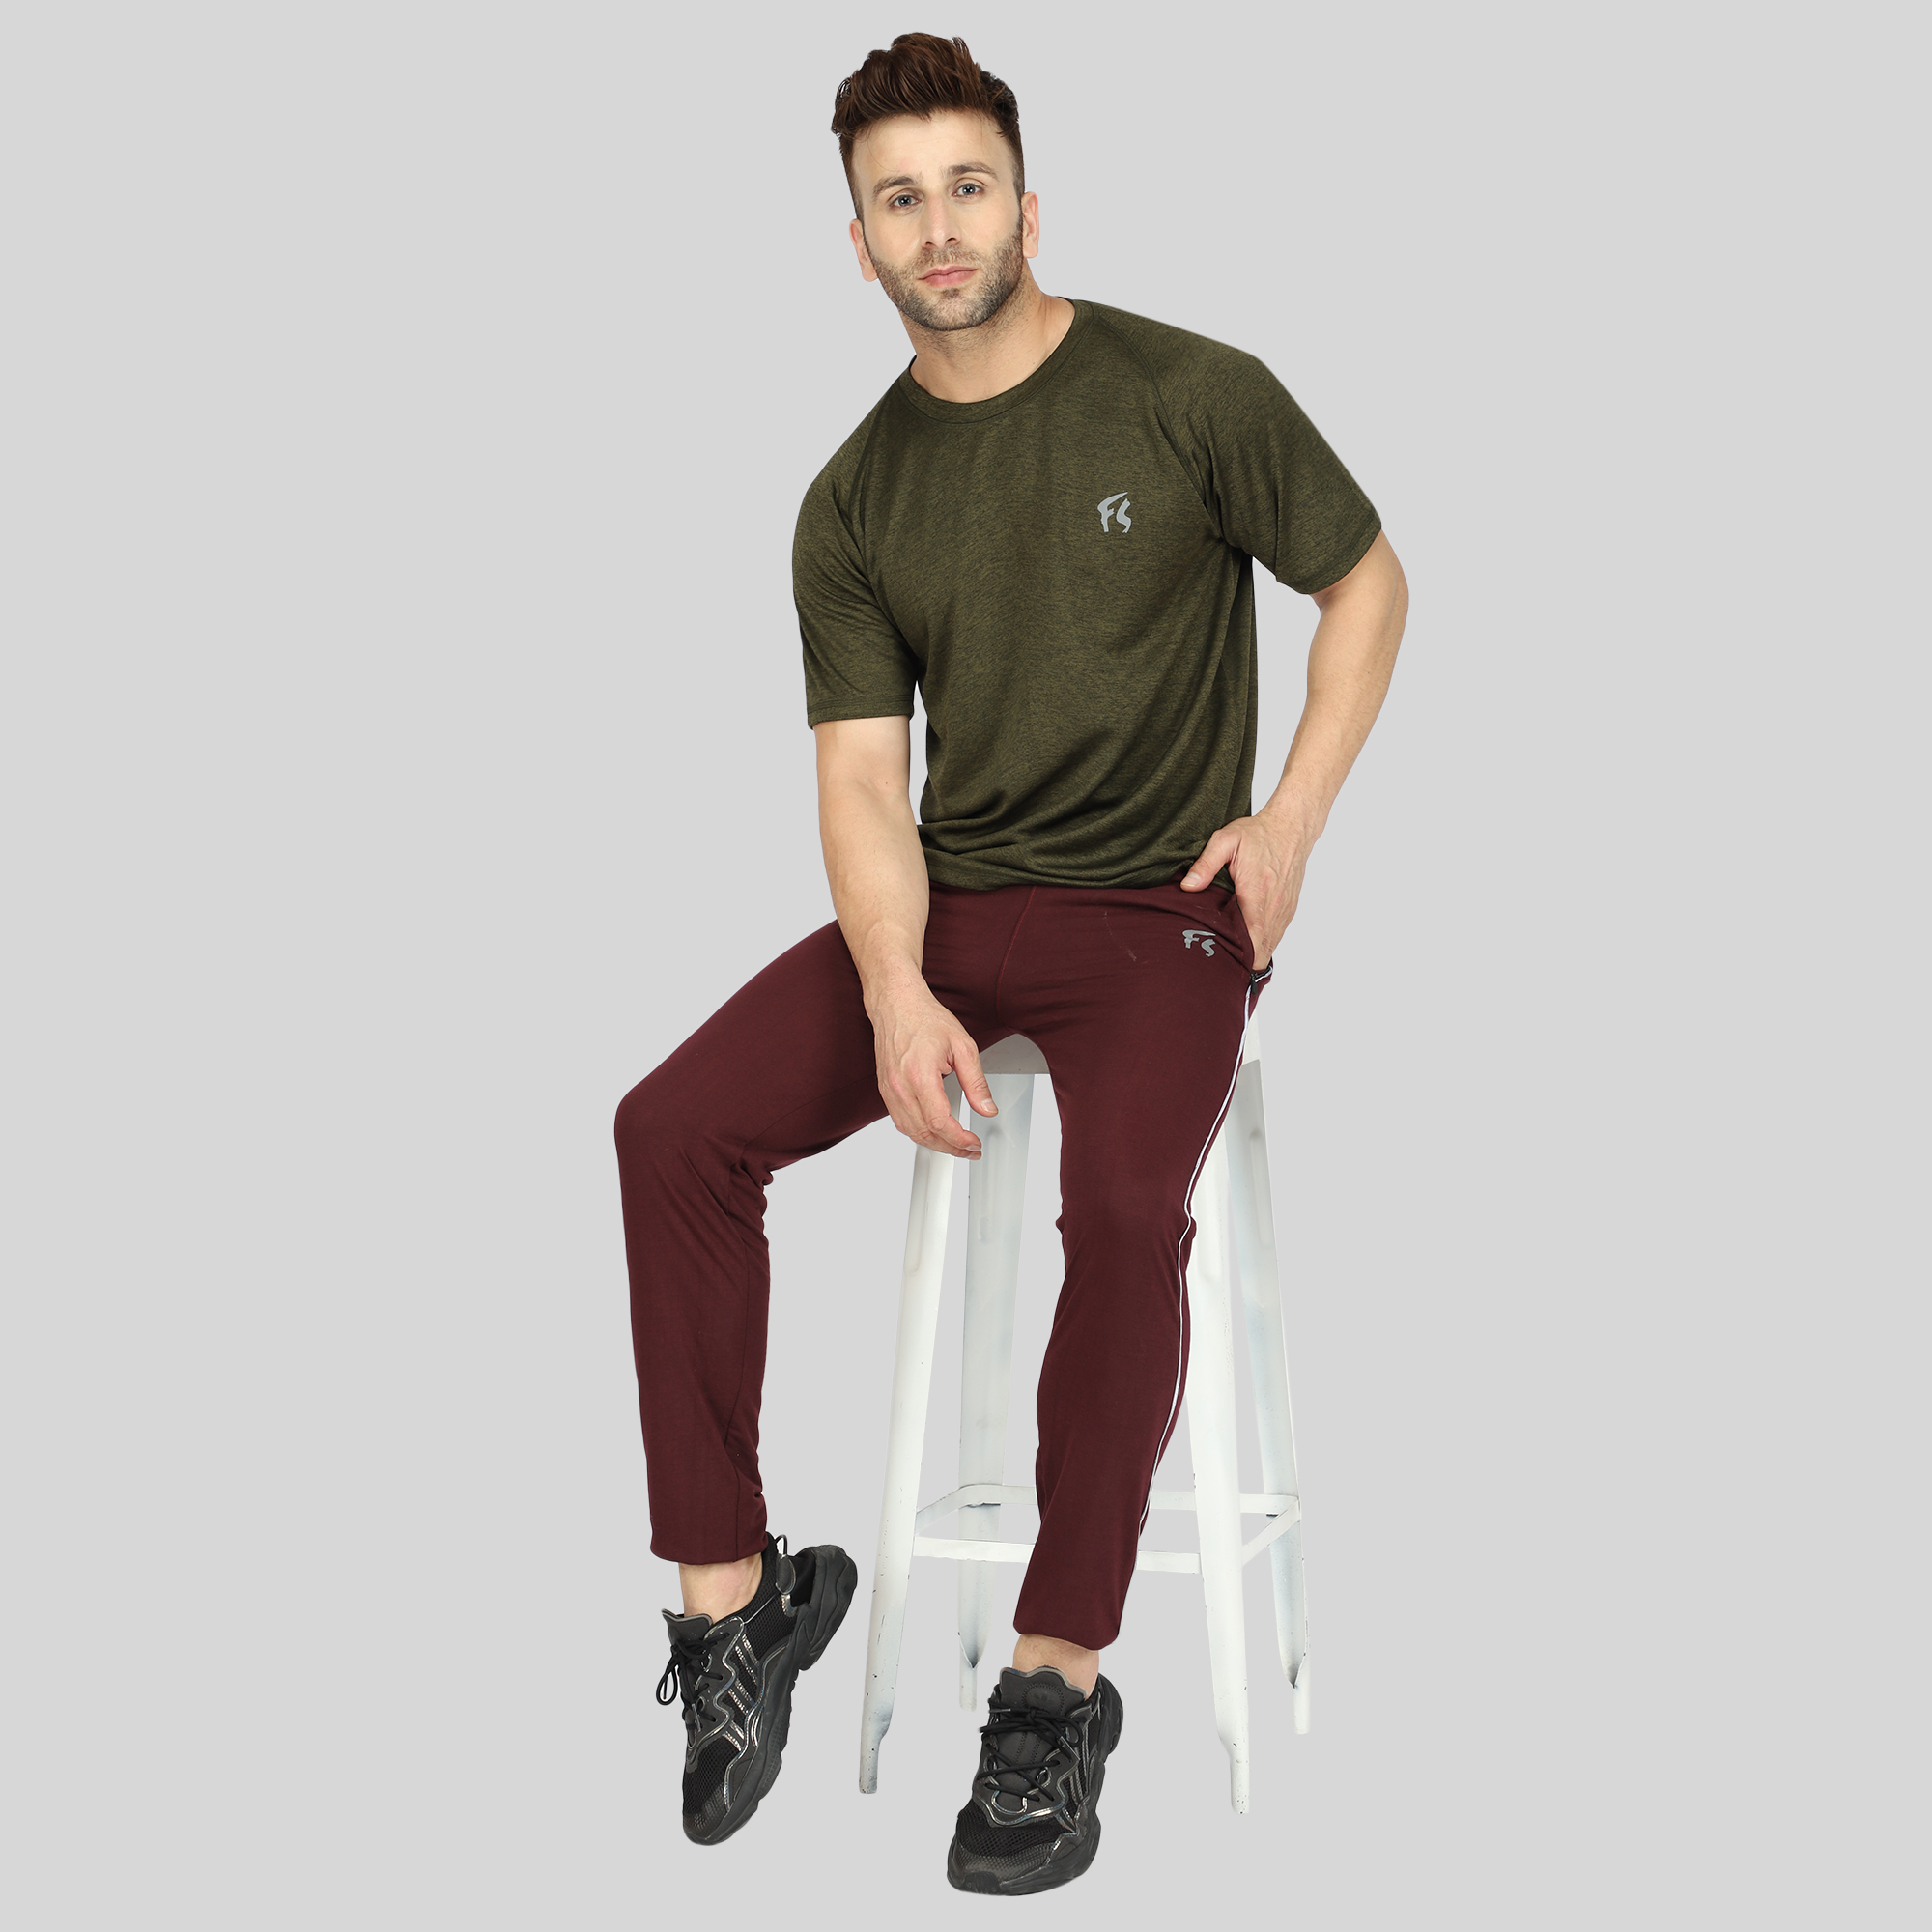 Dark Red & Maroon Pants For Guy's With Shirts Combination Outfits Ideas  2022 | Red pants outfit, Maroon pants, Red pants